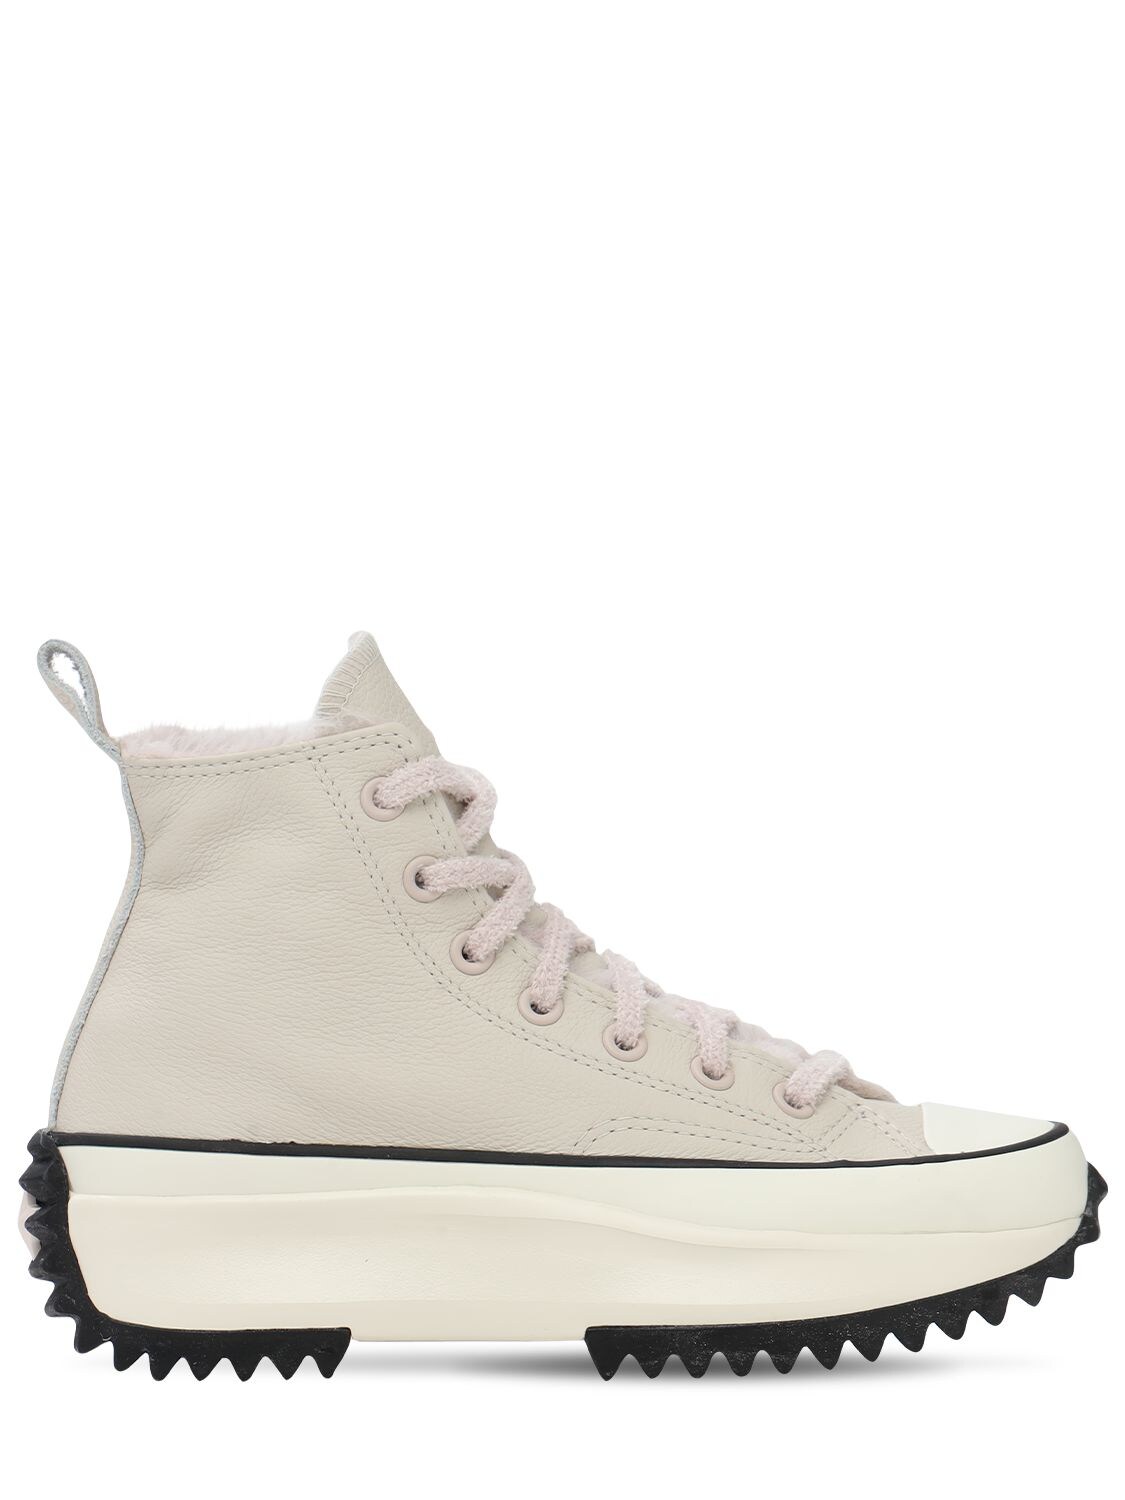 Converse Run Star Hike Hi Leather Sneakers In Off White